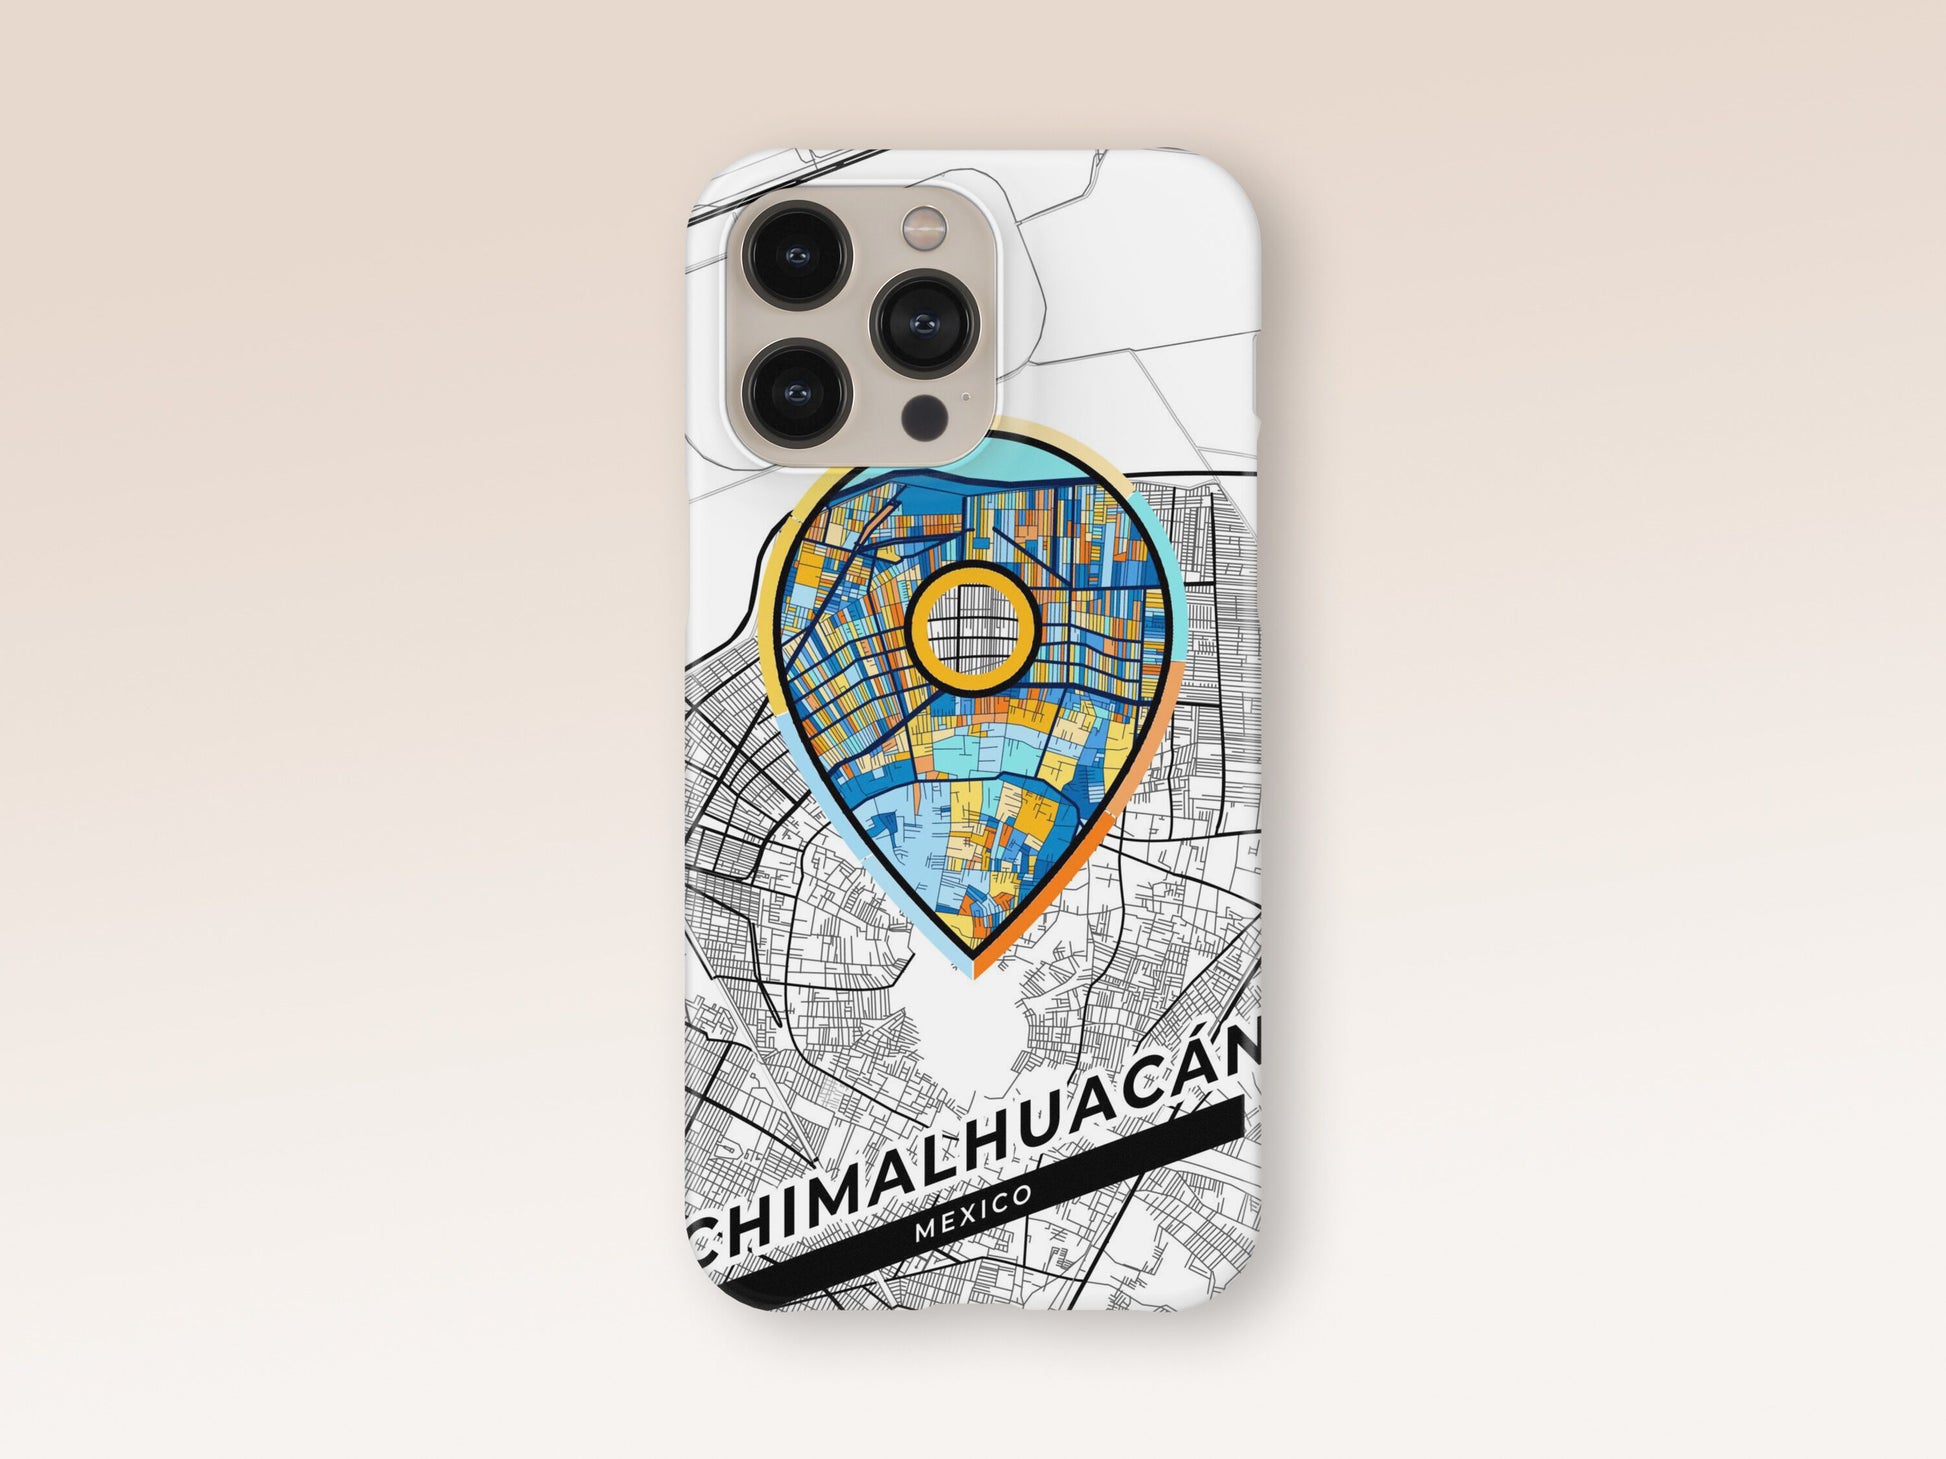 Chimalhuacán Mexico slim phone case with colorful icon. Birthday, wedding or housewarming gift. Couple match cases. 1